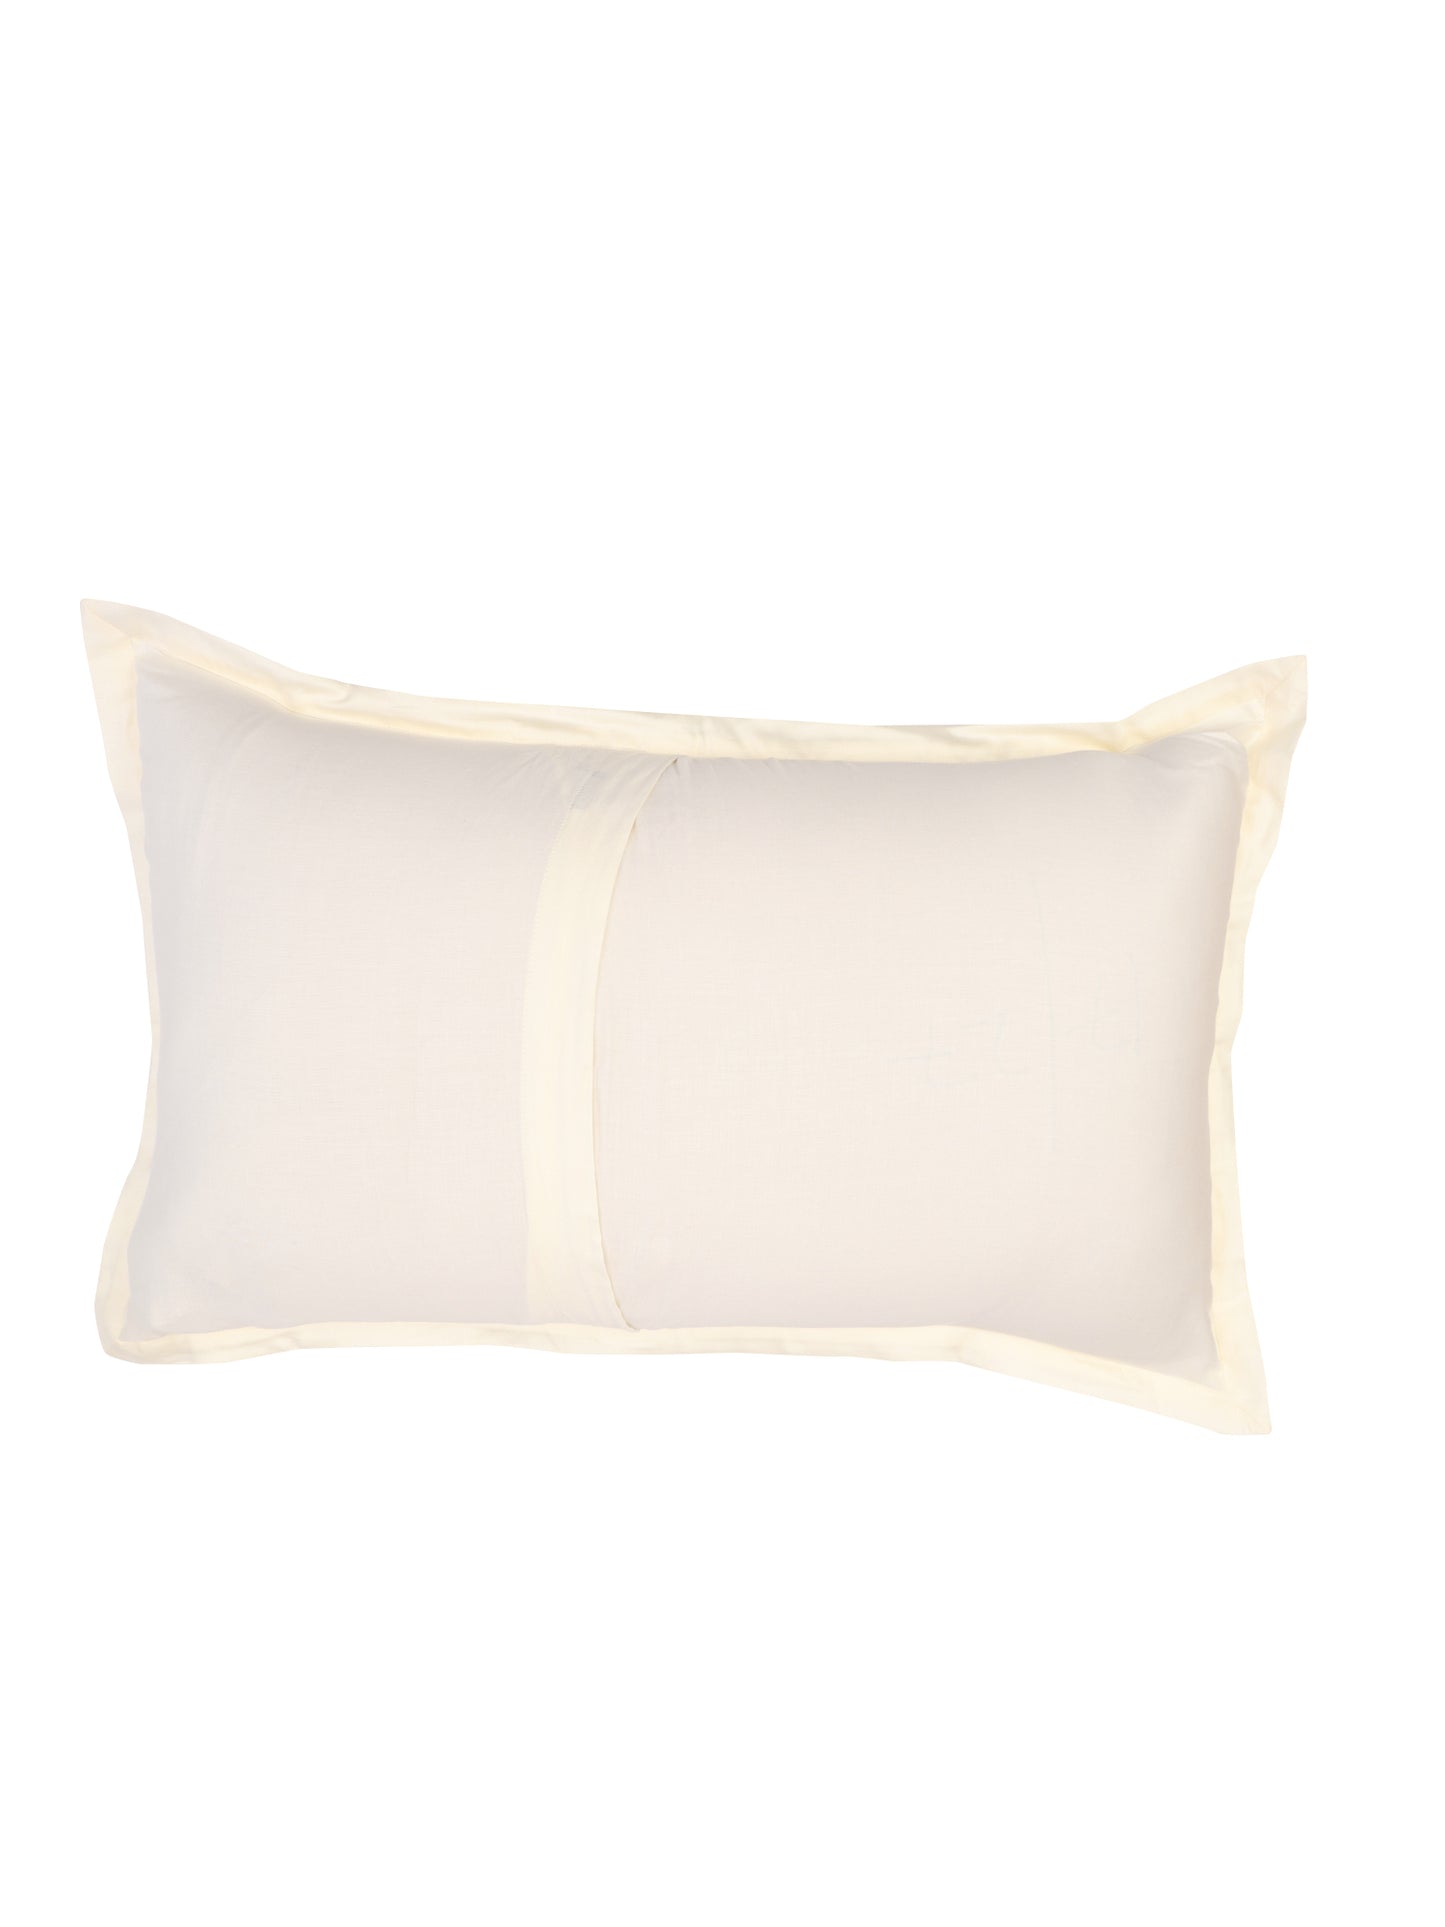 back side of offwhite colored embroidered pillow sham 